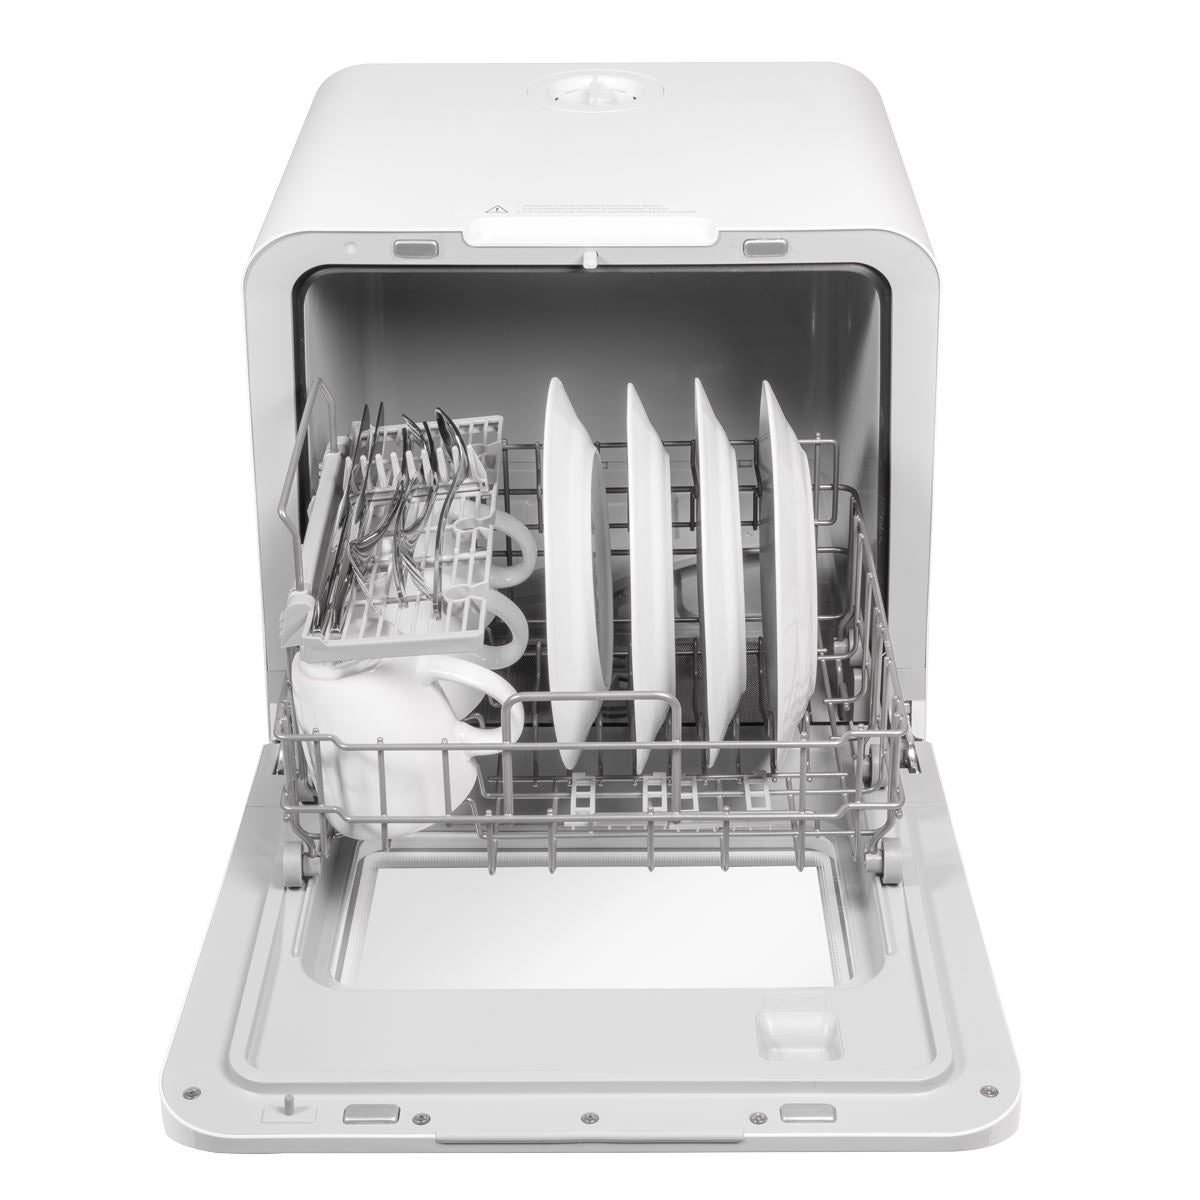 Dellonda 3 Place Settings Mini Portable Tabletop Dishwasher with 7 Wash Functions